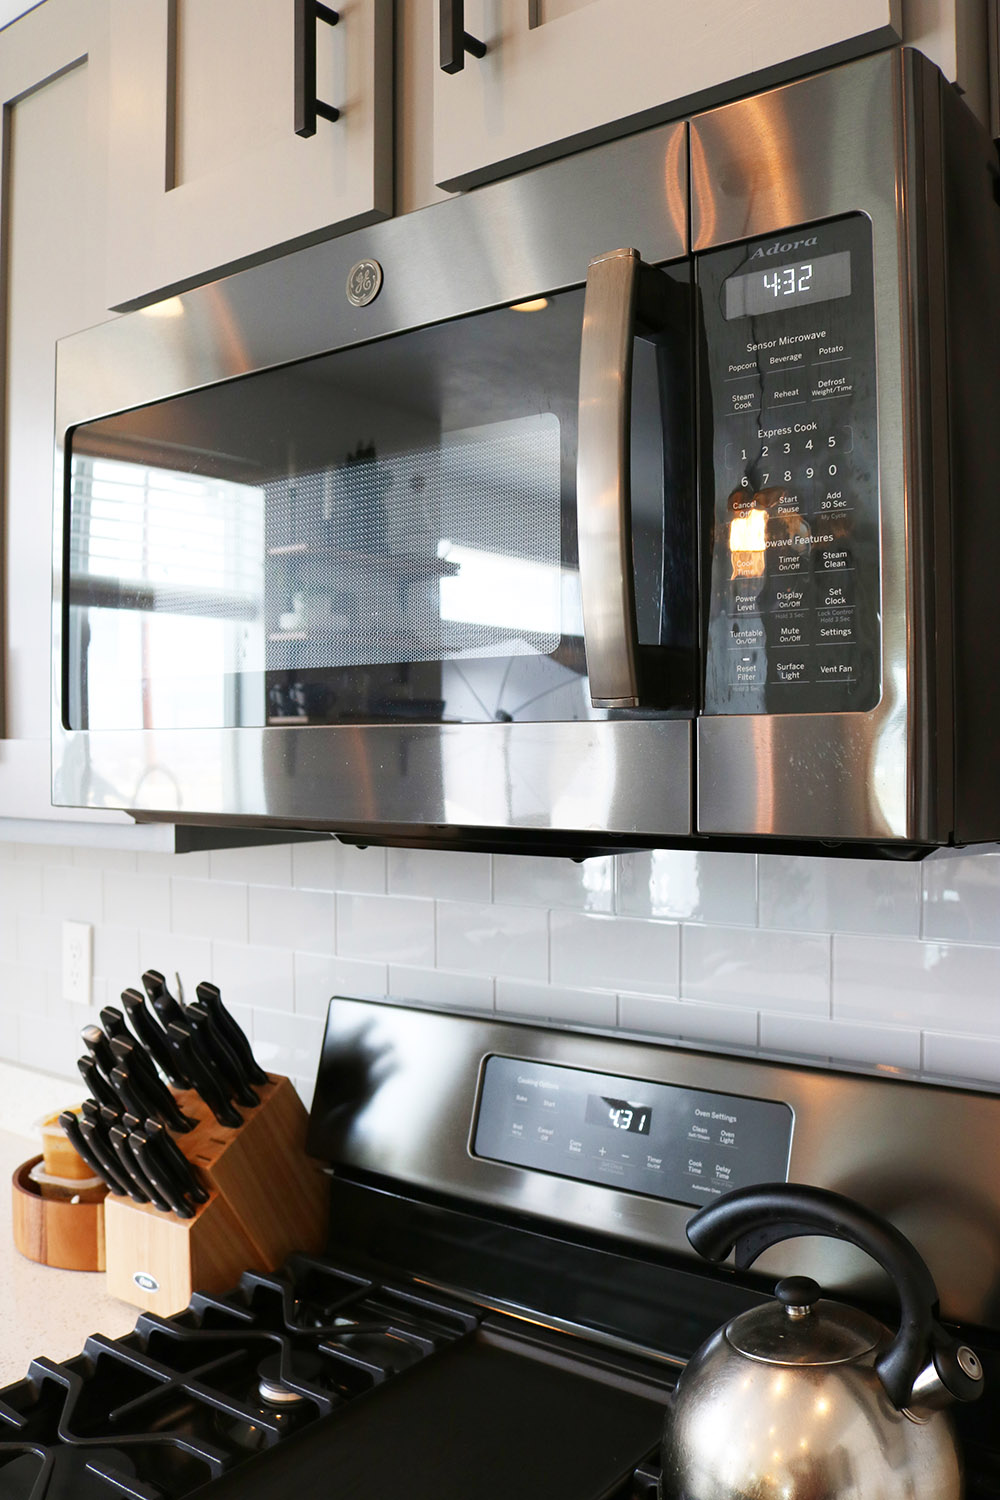 A GE black stainless steel microwave hangs over a gas range.